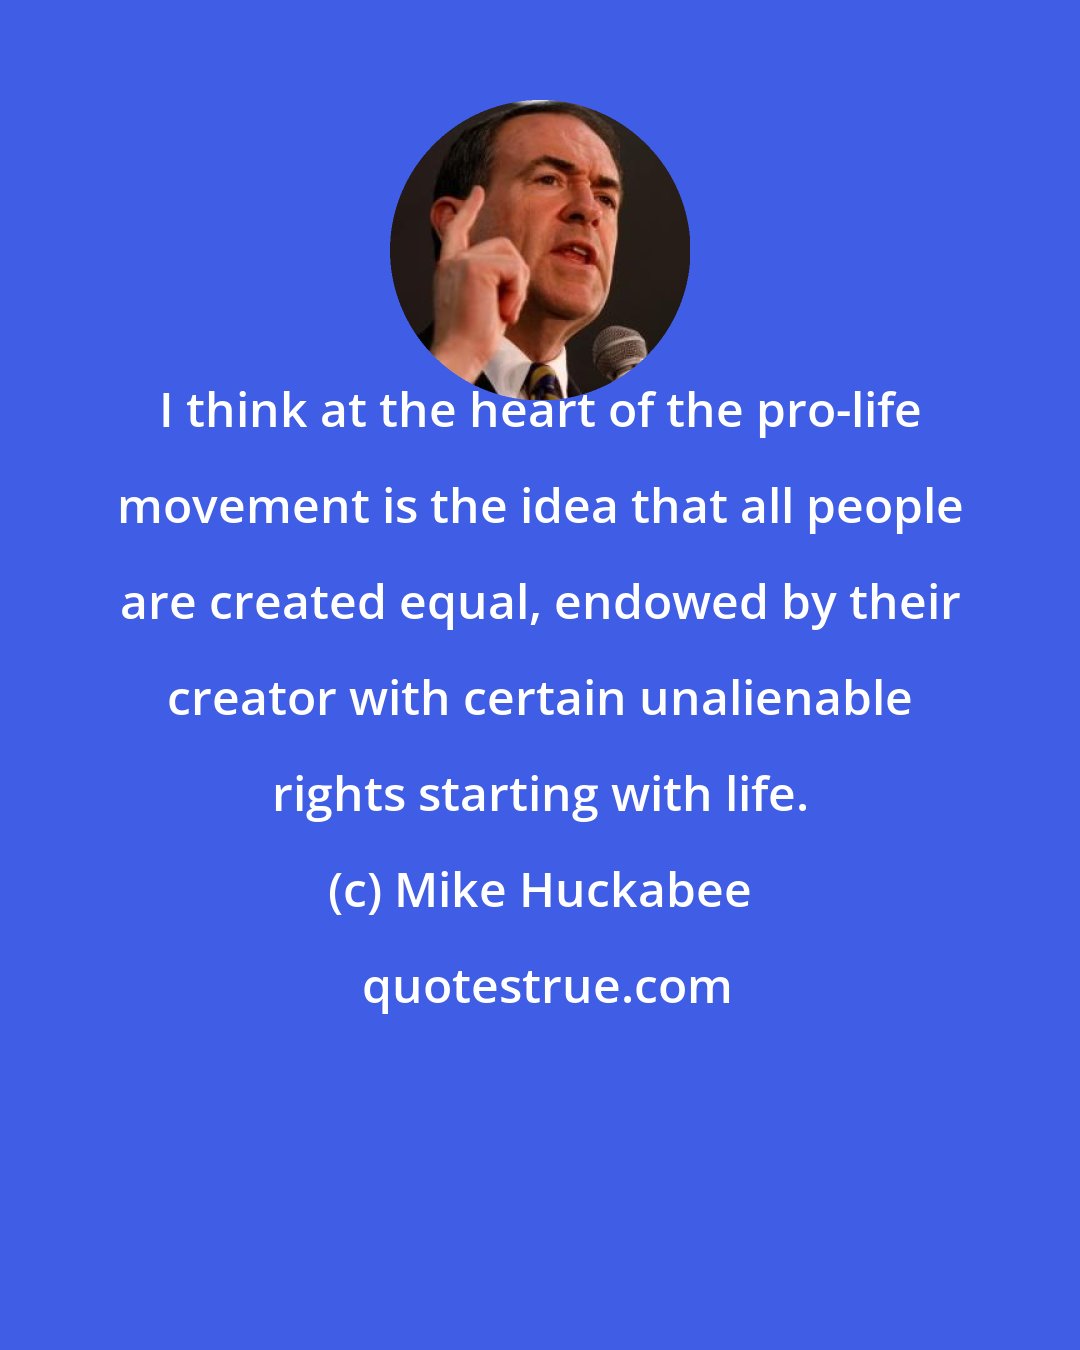 Mike Huckabee: I think at the heart of the pro-life movement is the idea that all people are created equal, endowed by their creator with certain unalienable rights starting with life.